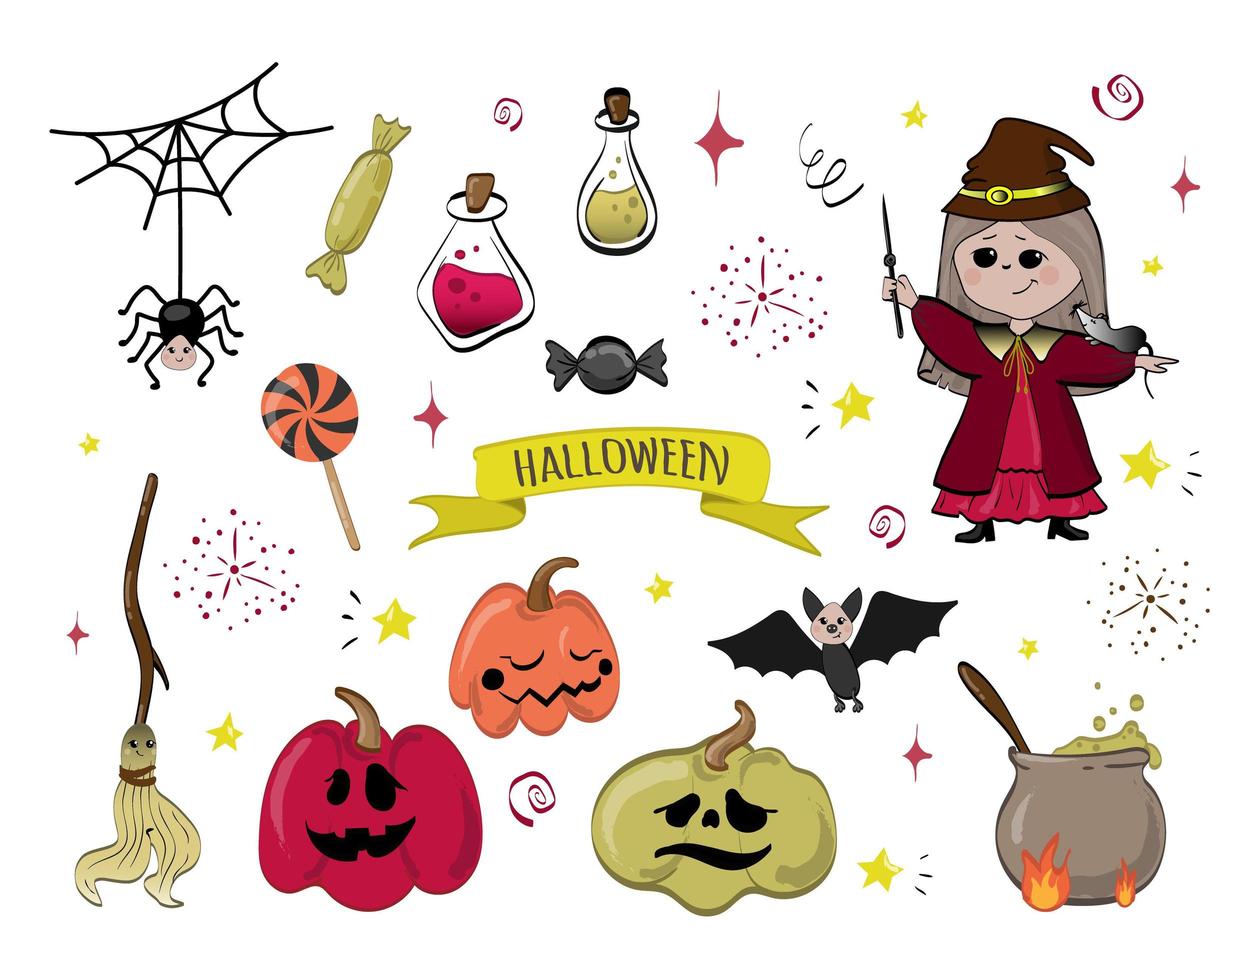 Halloween clipart set with cute cartoon characters, pumpkins and other holiday symbols vector